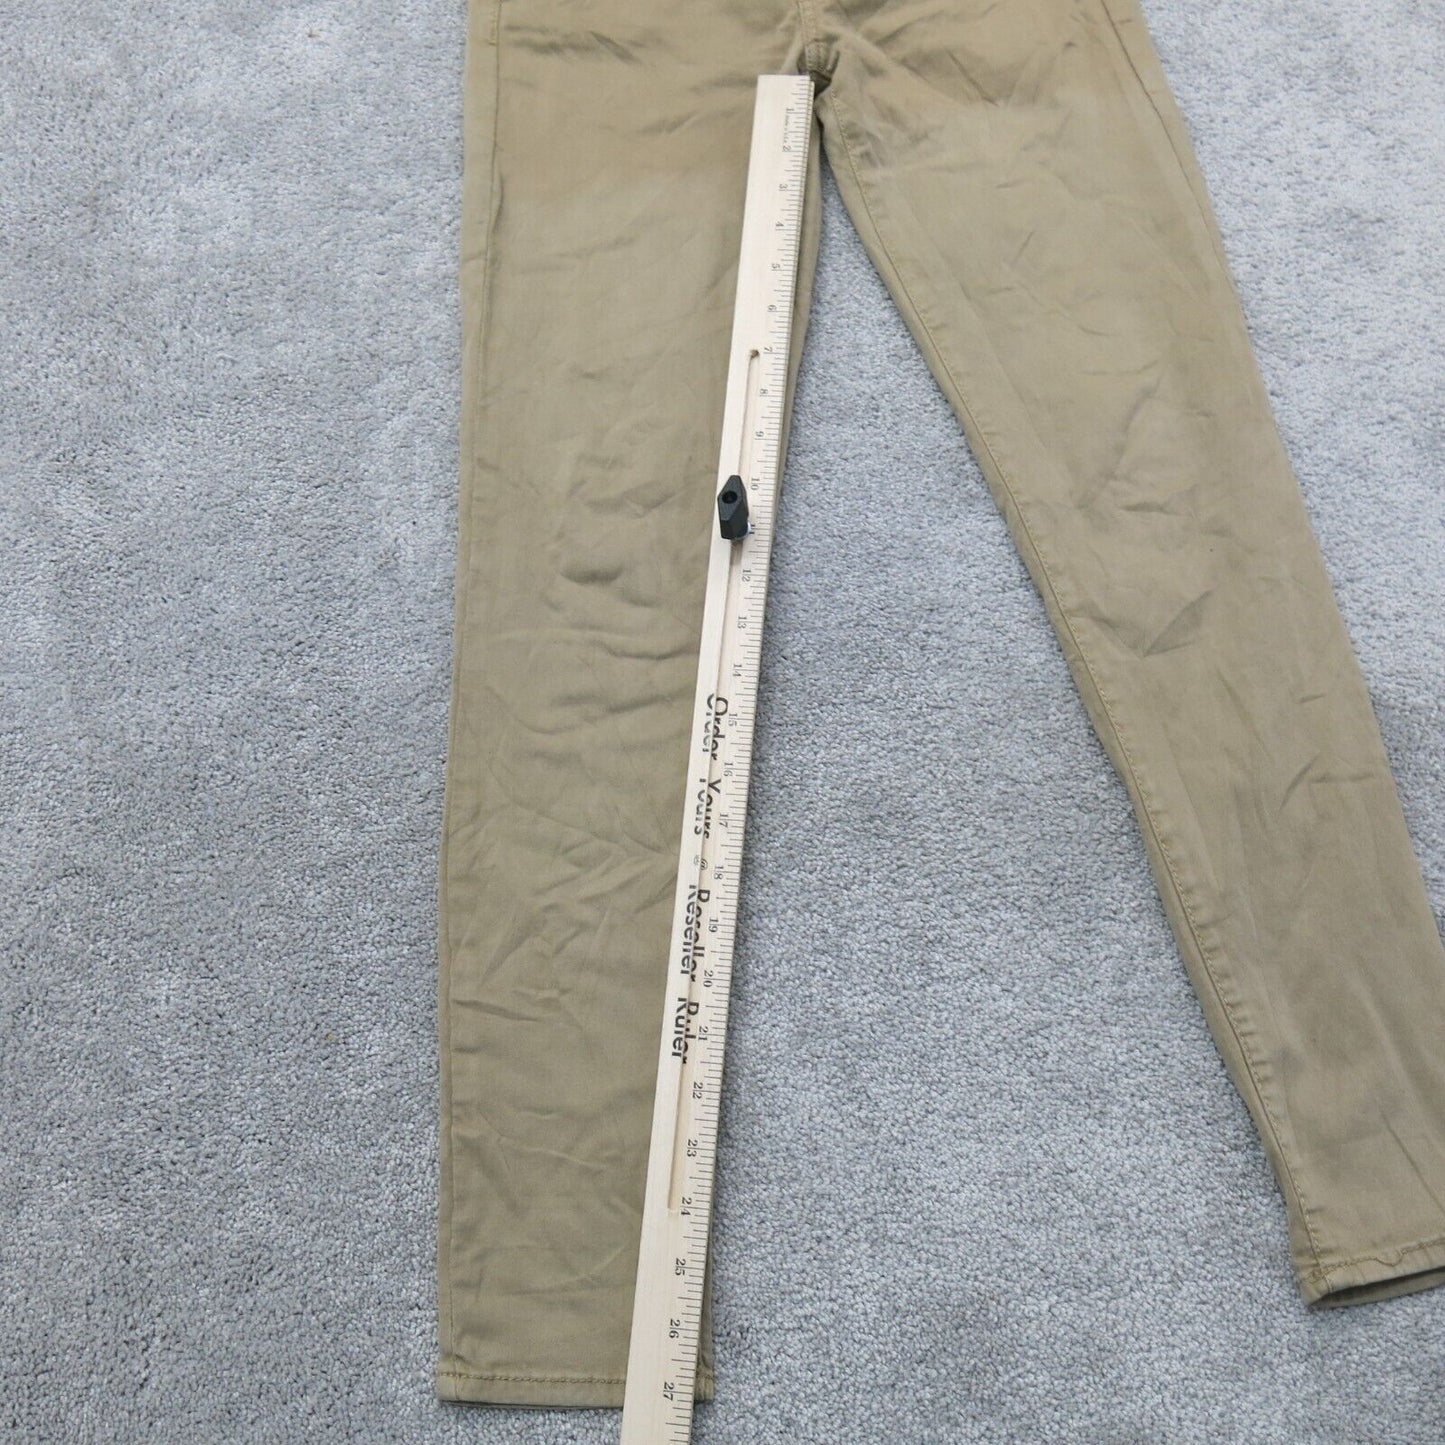 American Eagle Outfitter Mens Slim Fit Jeans Super Stretch Mid Rise Khaki Size 4